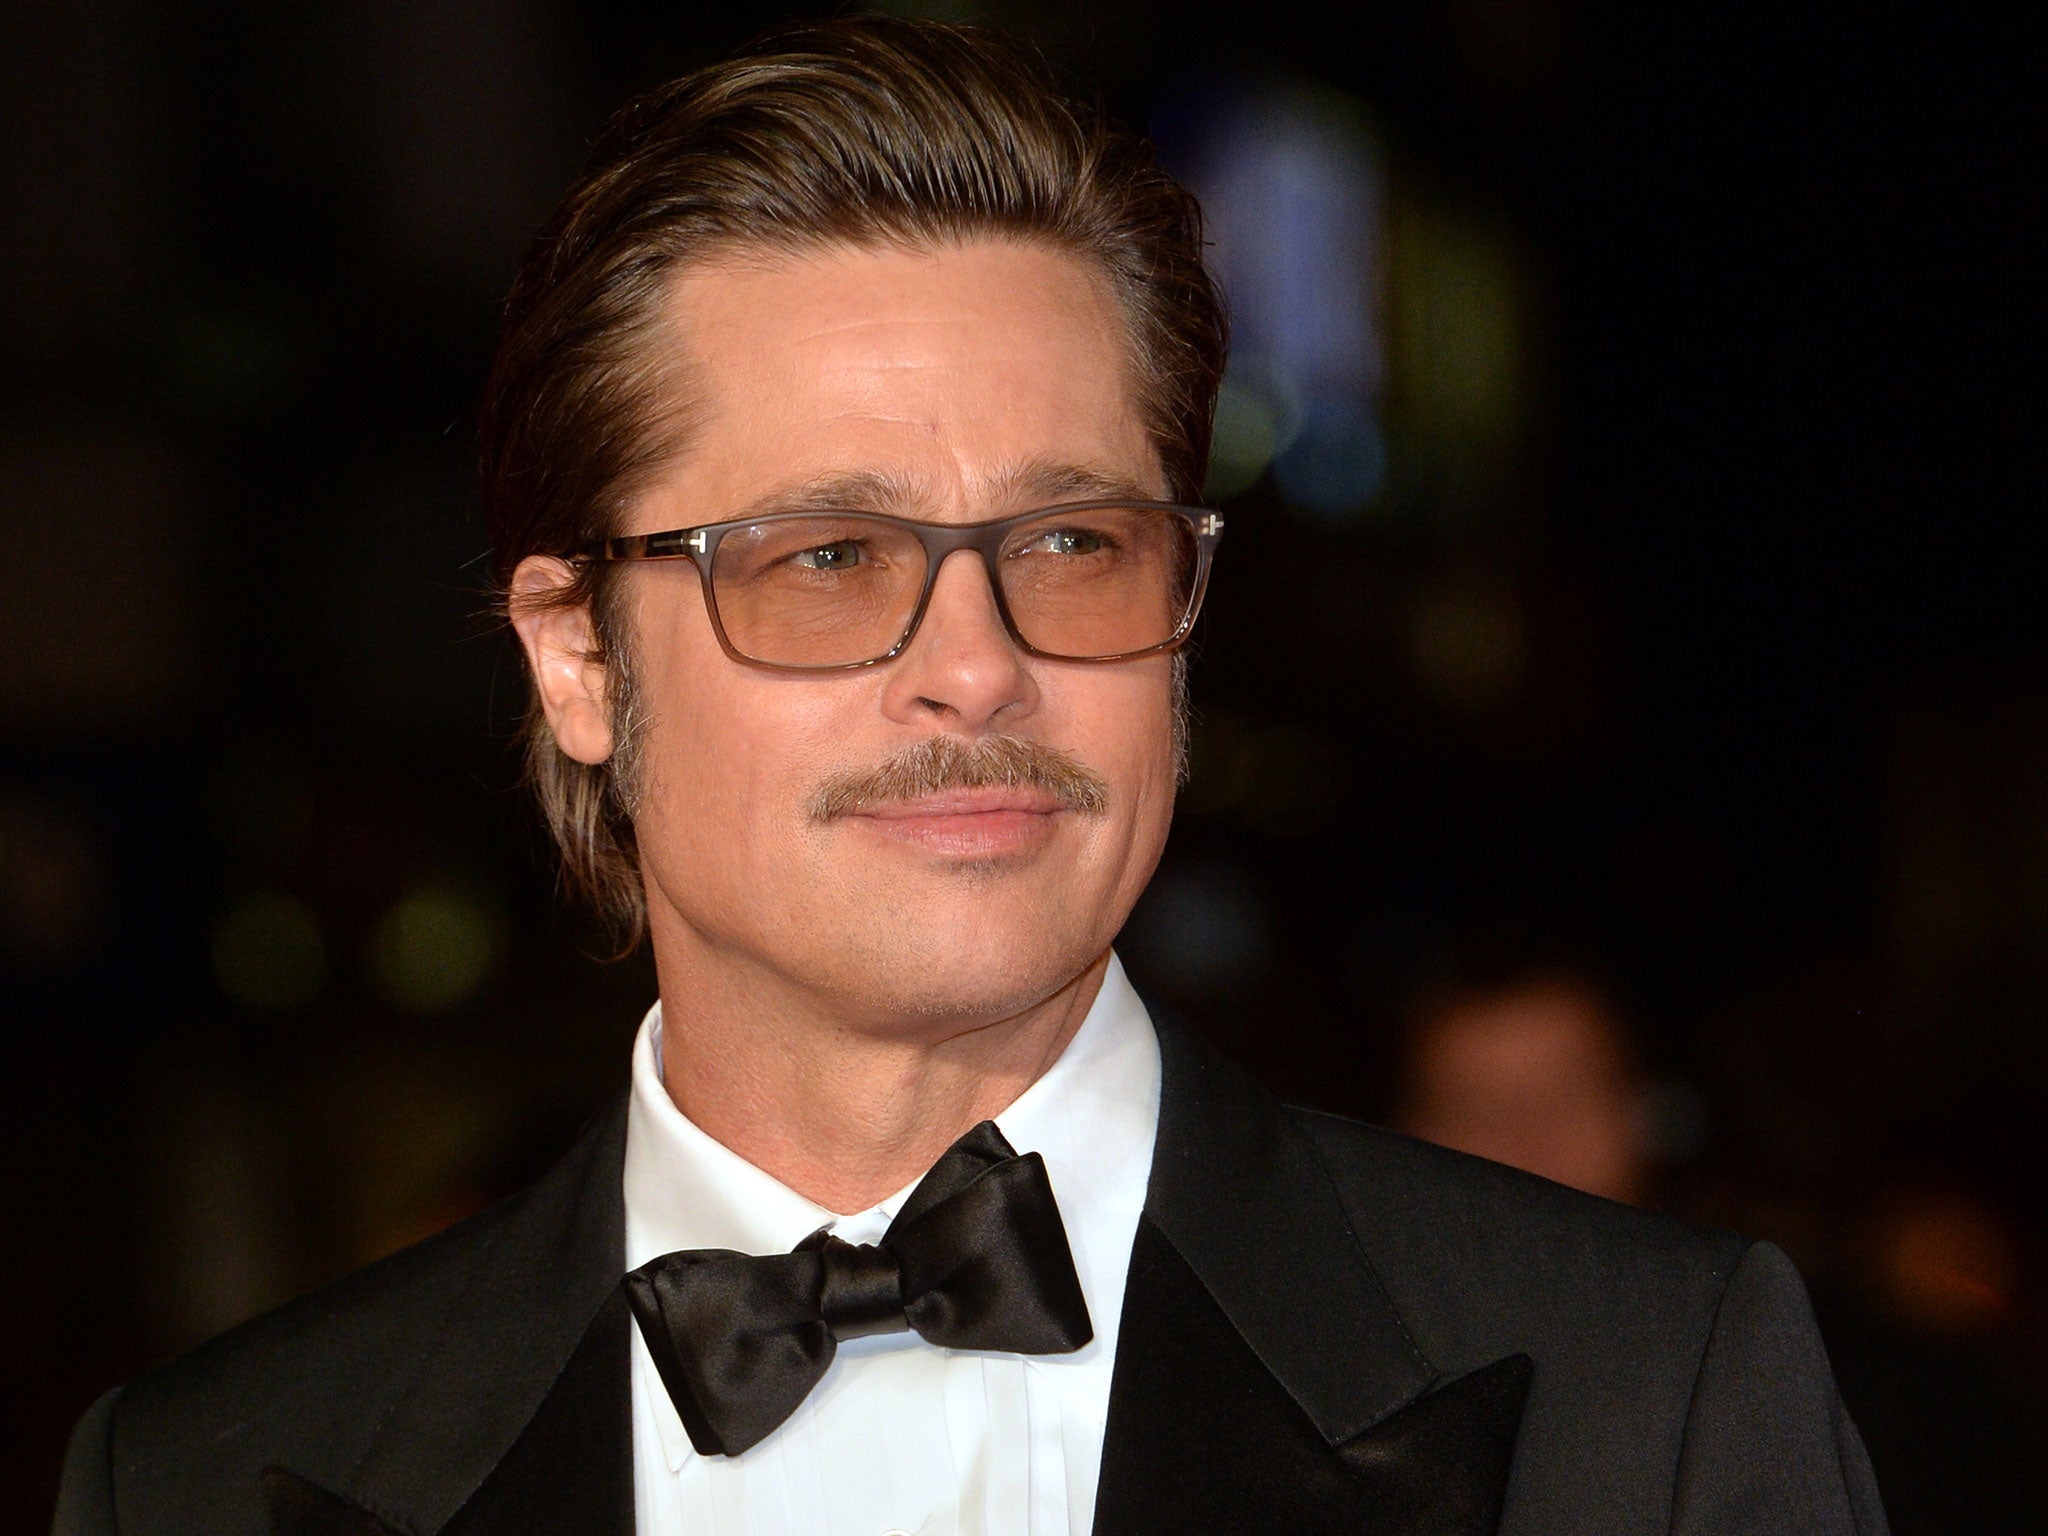 Brad Pitt is taking on another Michael Lewis film adaptation